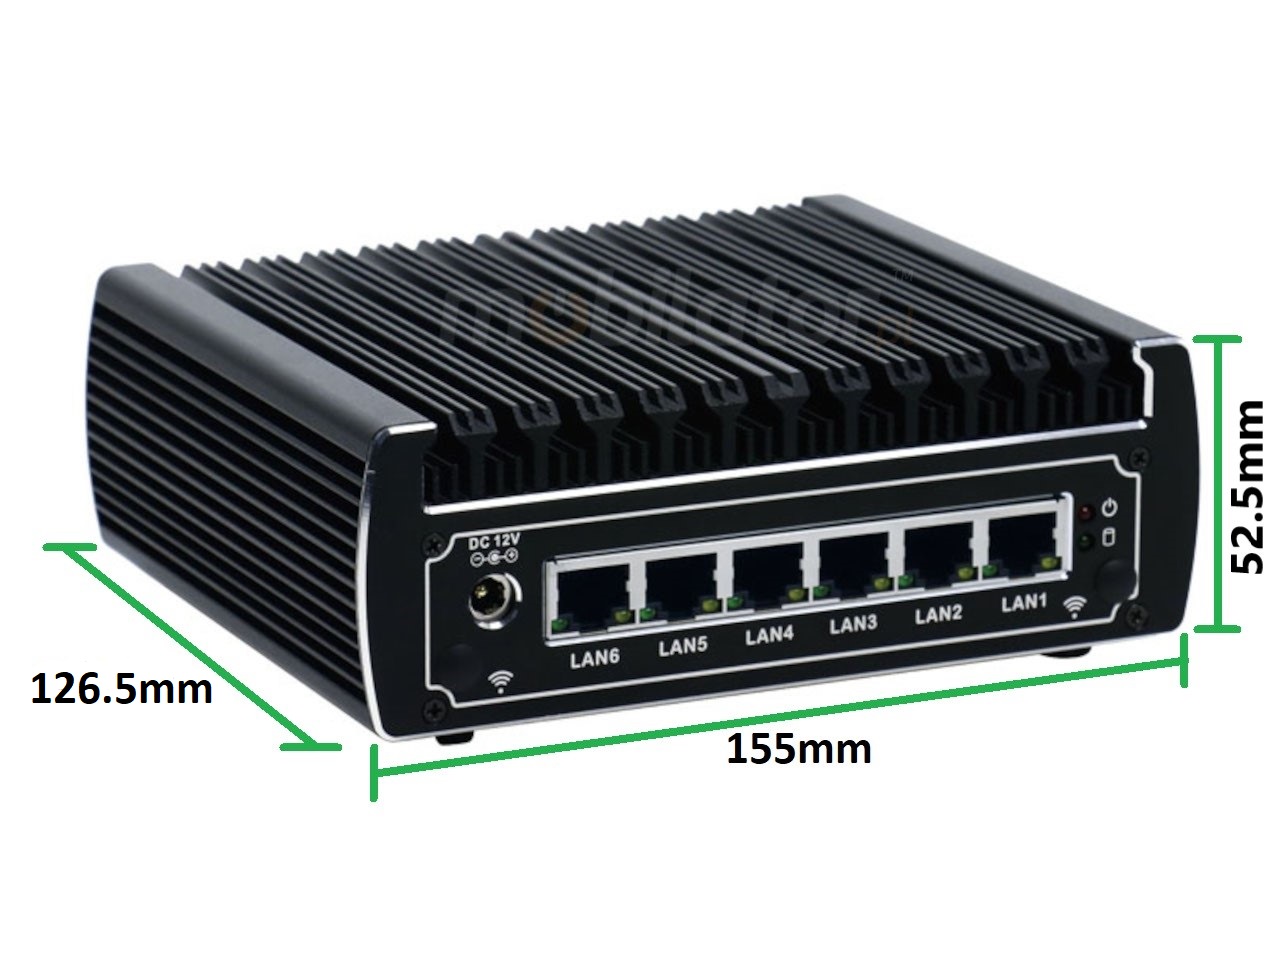  IBOX N133 v.6,  WIFI, BLUETOOTH, size, industrial small fast reliable fanless industrial small LAN INTEL i3 SSD DDR4